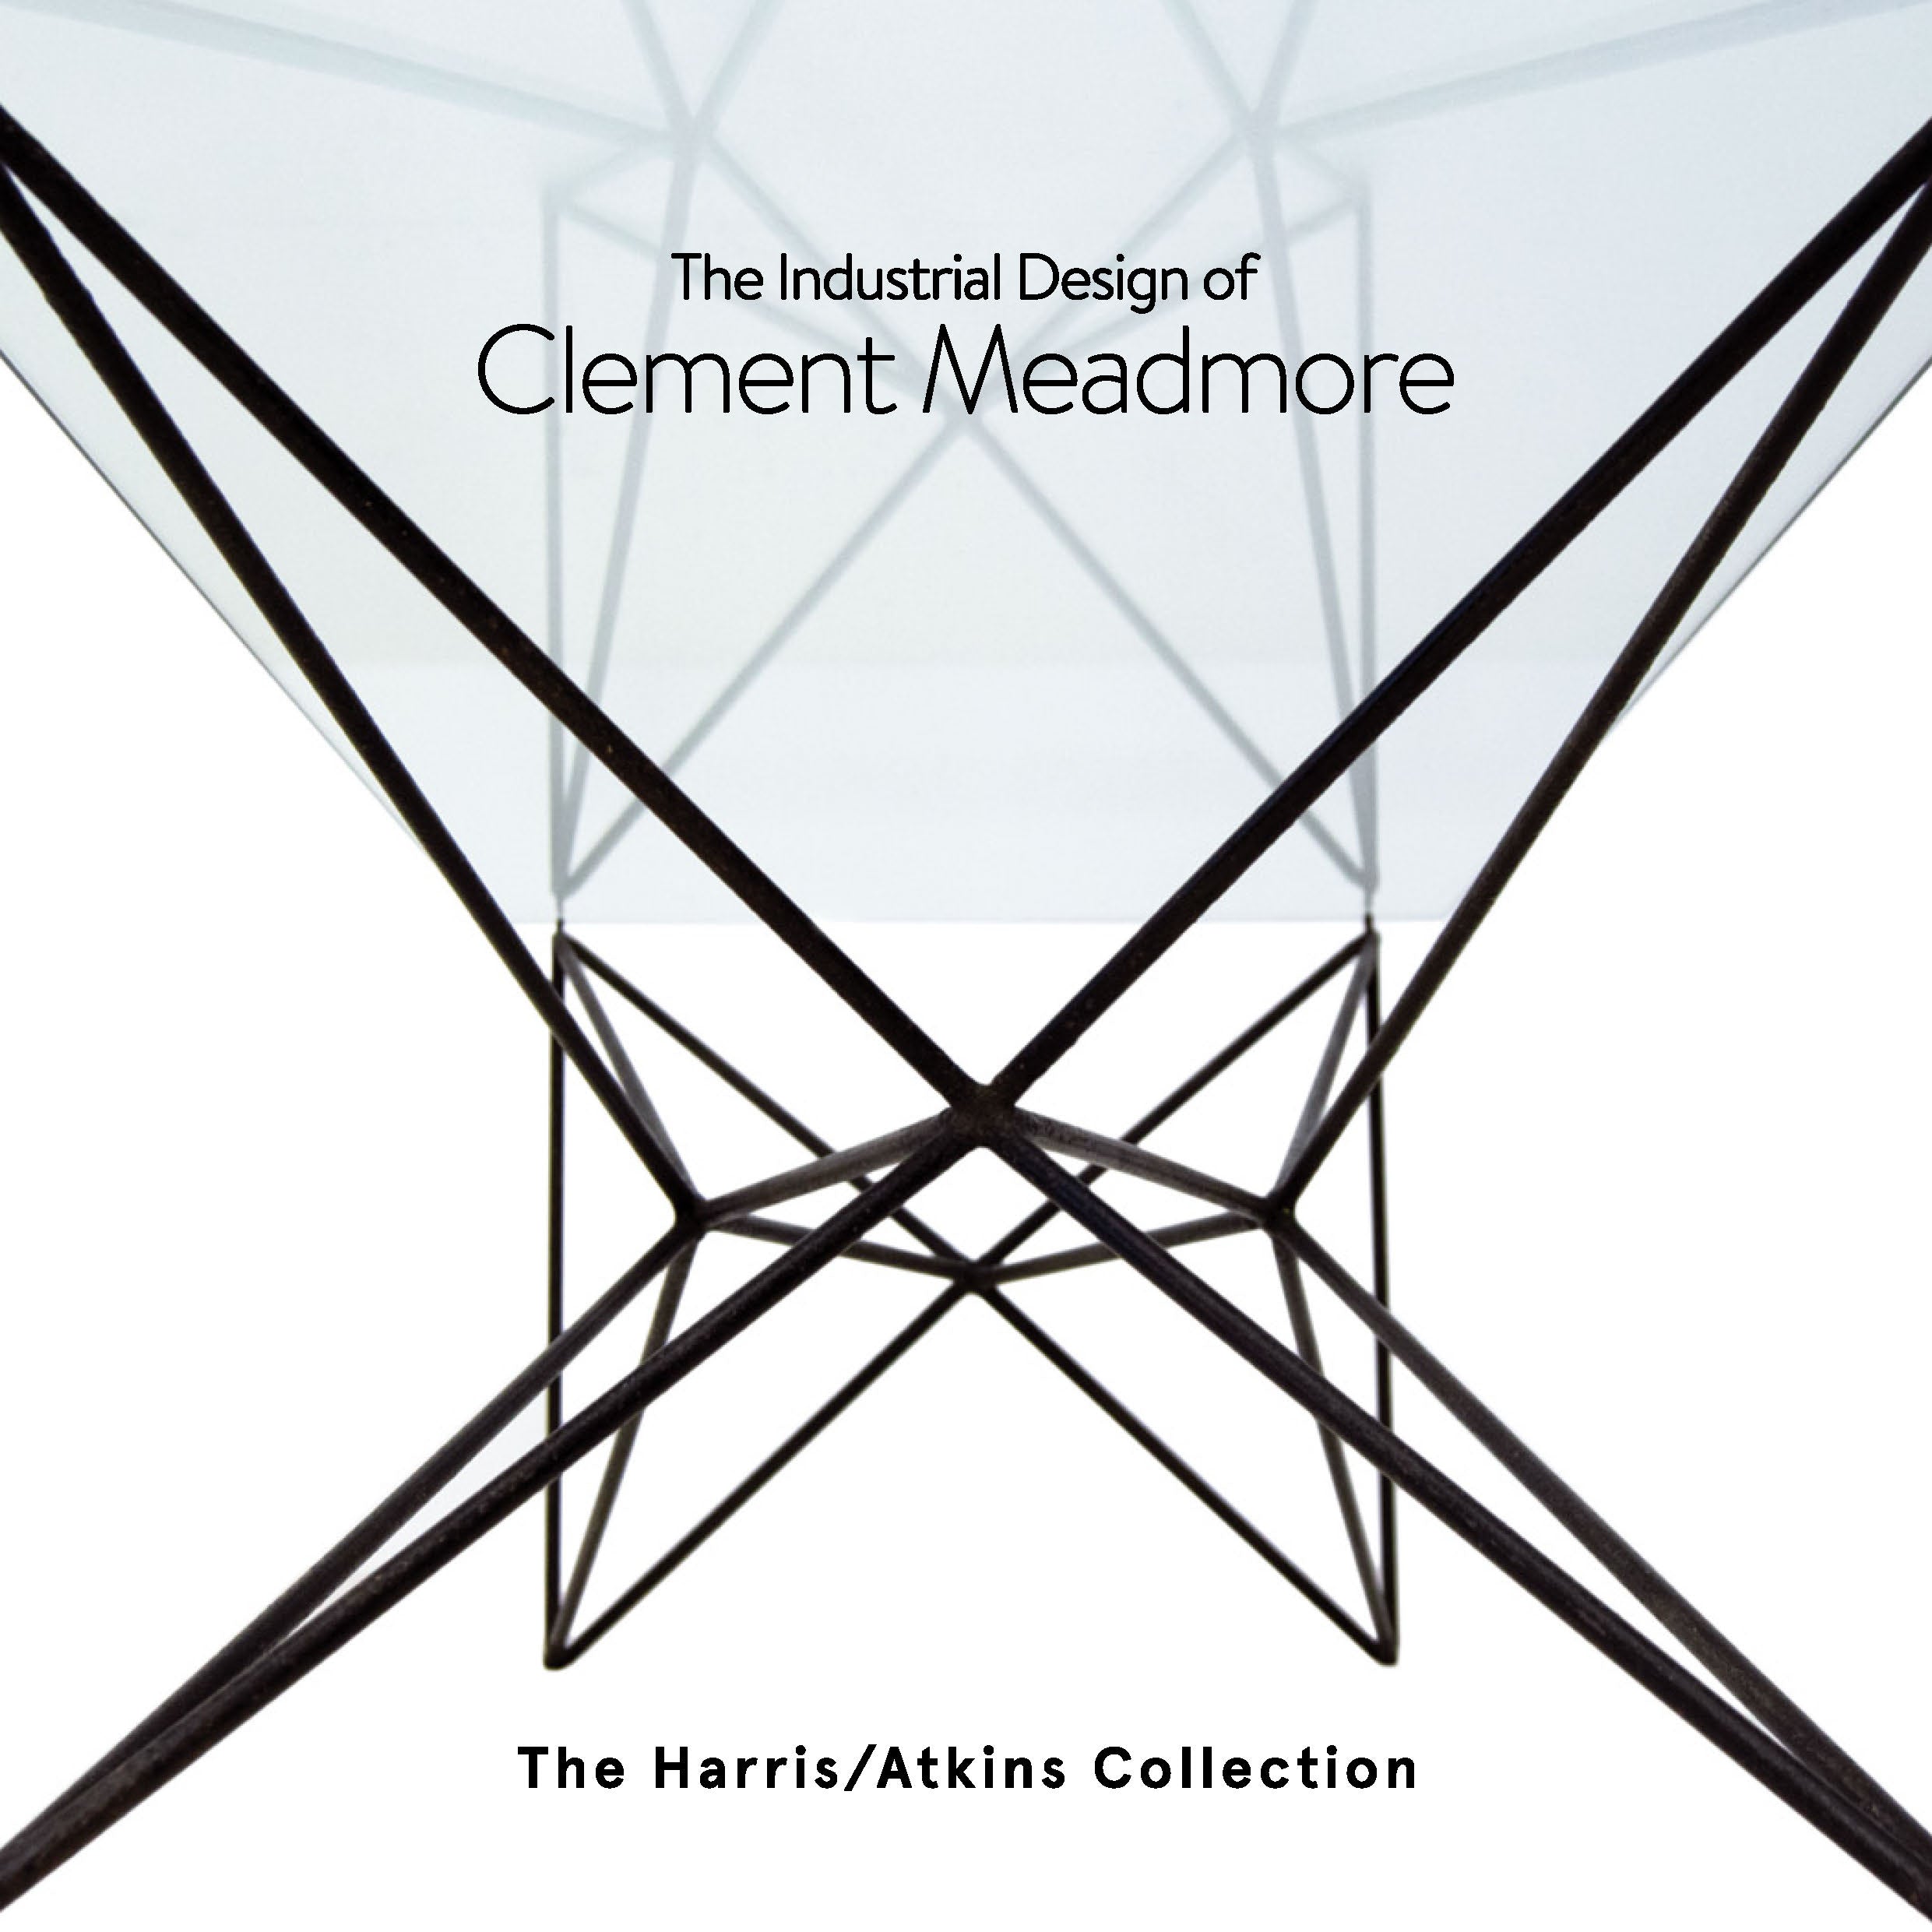 The Industrial Design of Clement Meadmore exhibition catalogue